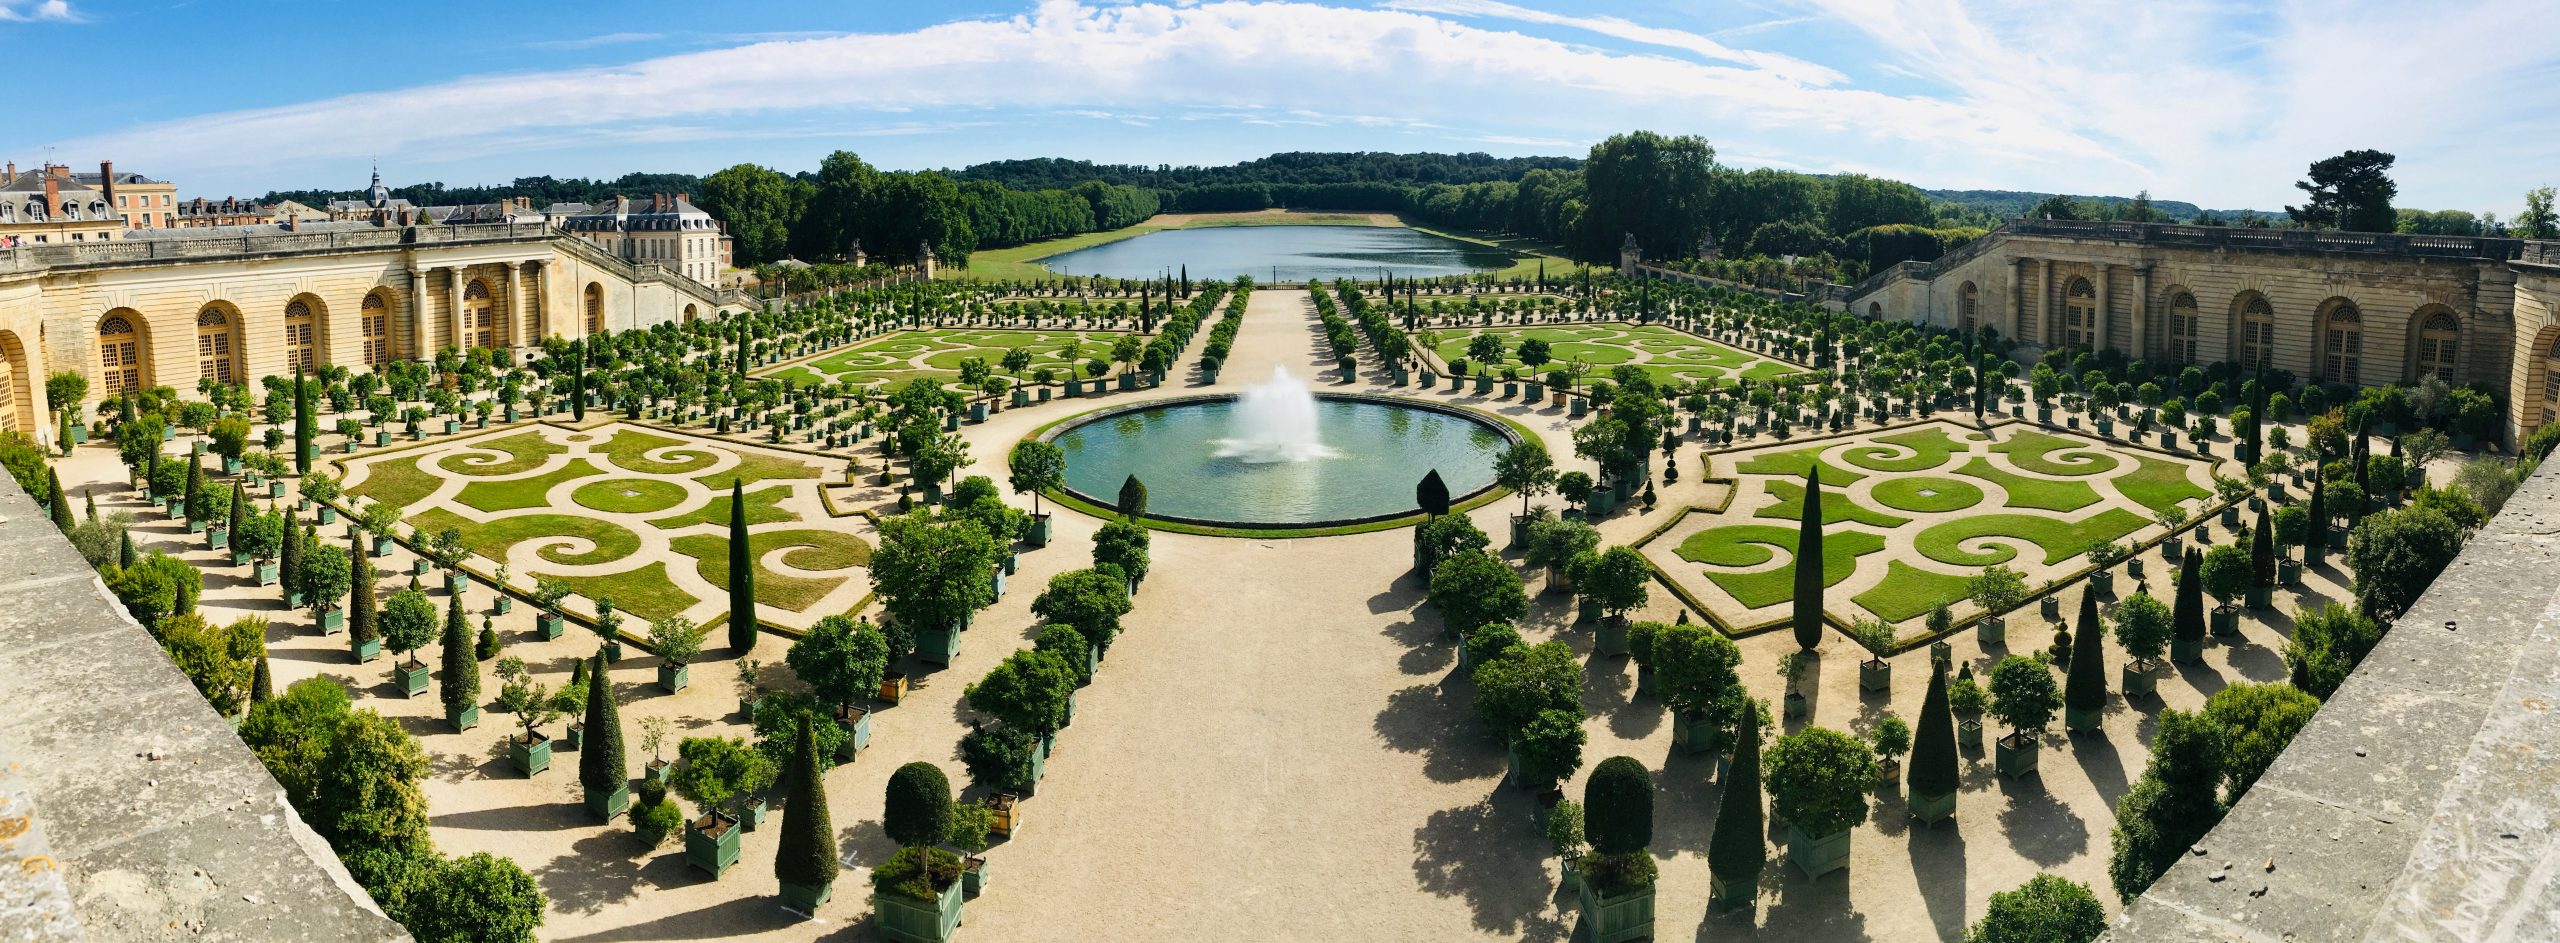 Where to Buy Palace of Versailles Tickets